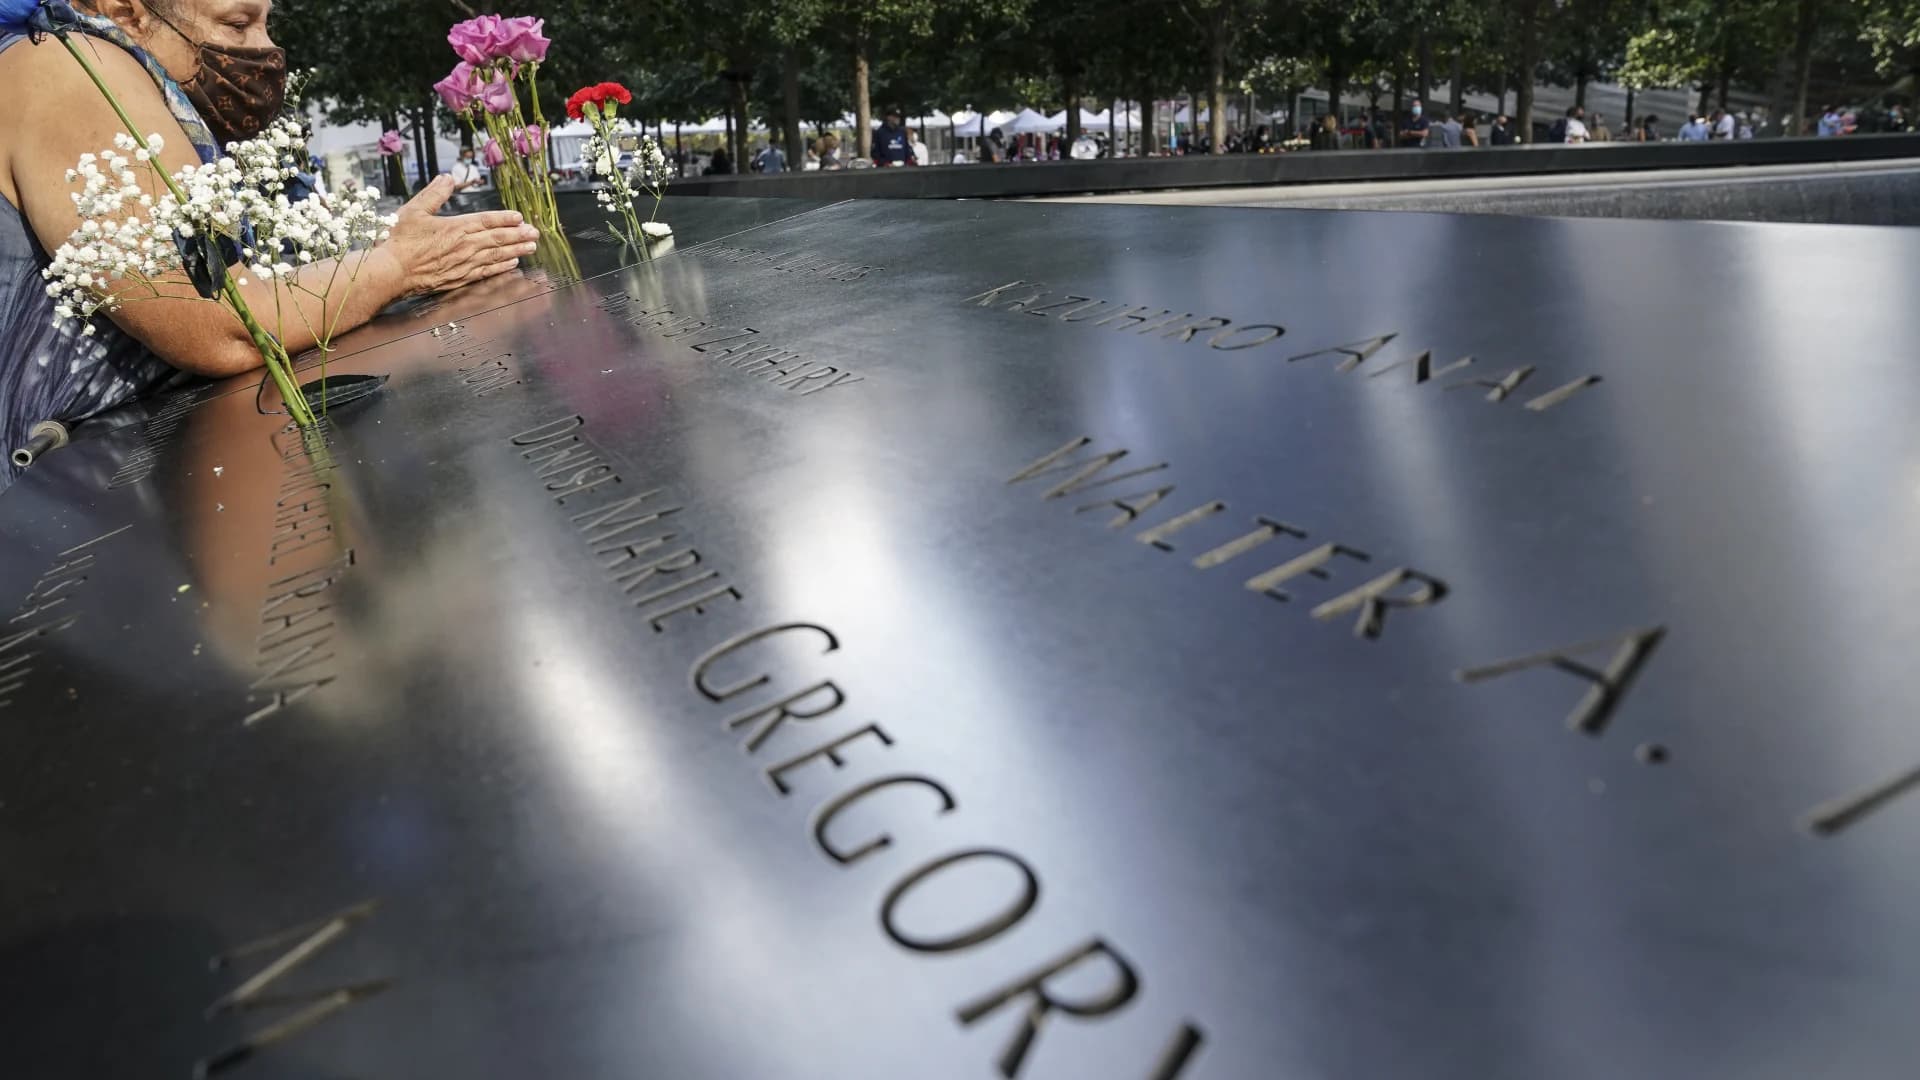 US soldier arrested in plot to blow up NYC 9/11 Memorial